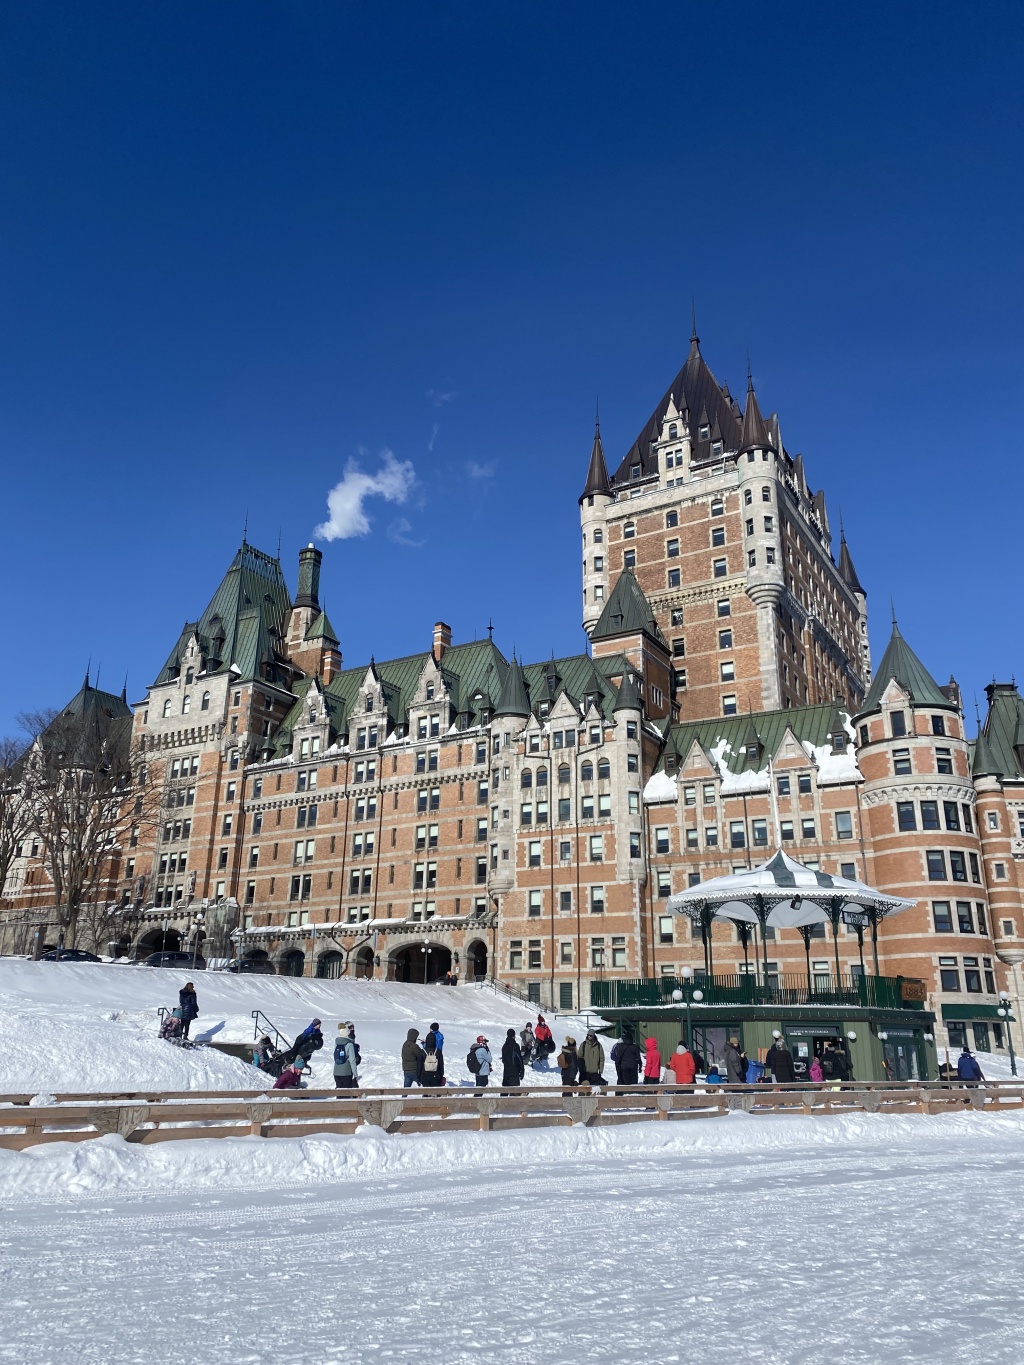 8 Best Things to Do in (or around) Quebec City, Canada